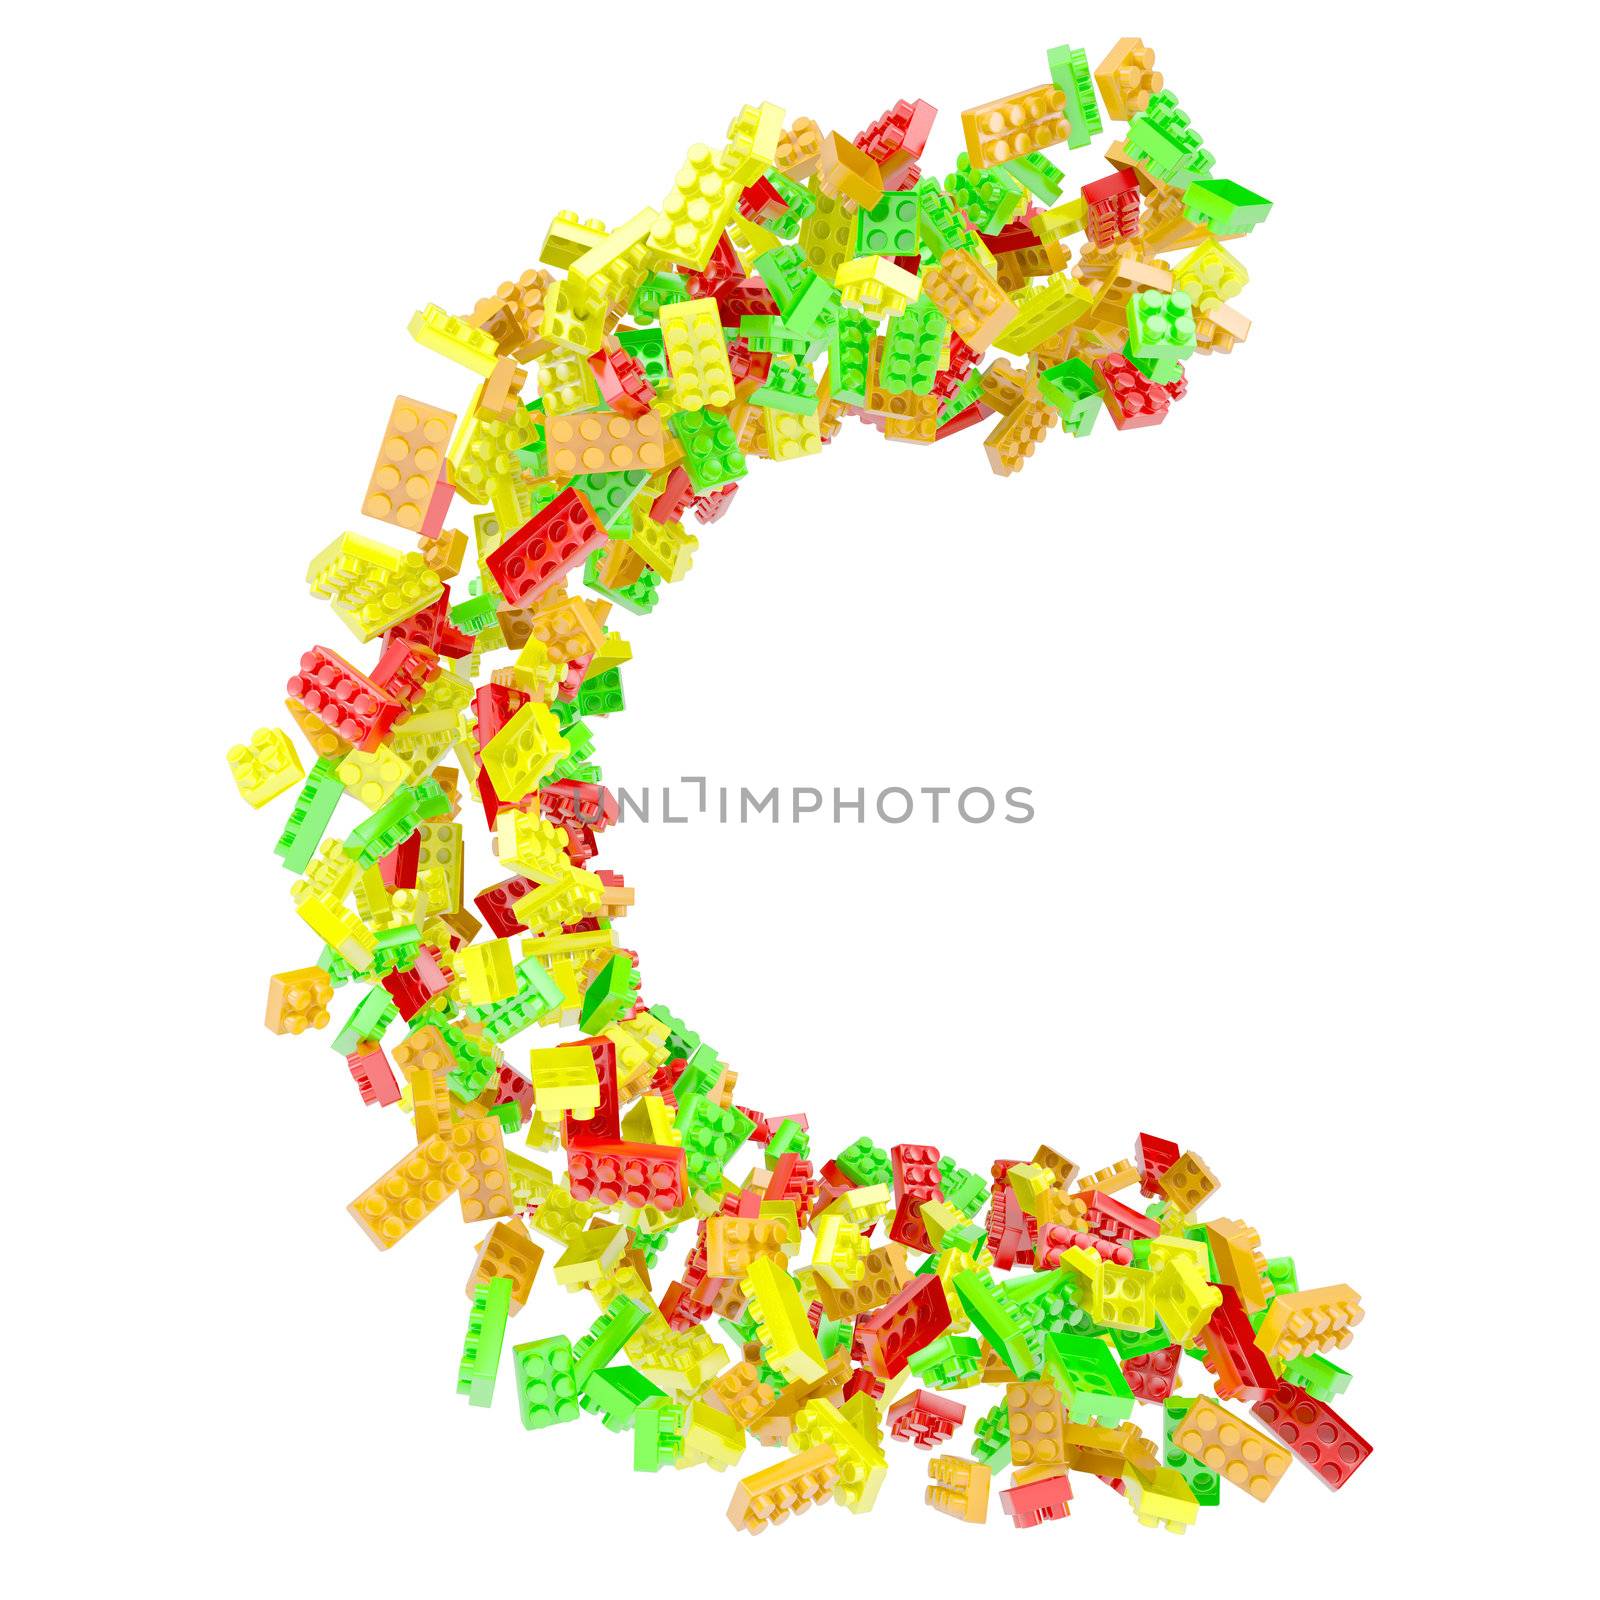 The letter C is made up of children's blocks by cherezoff